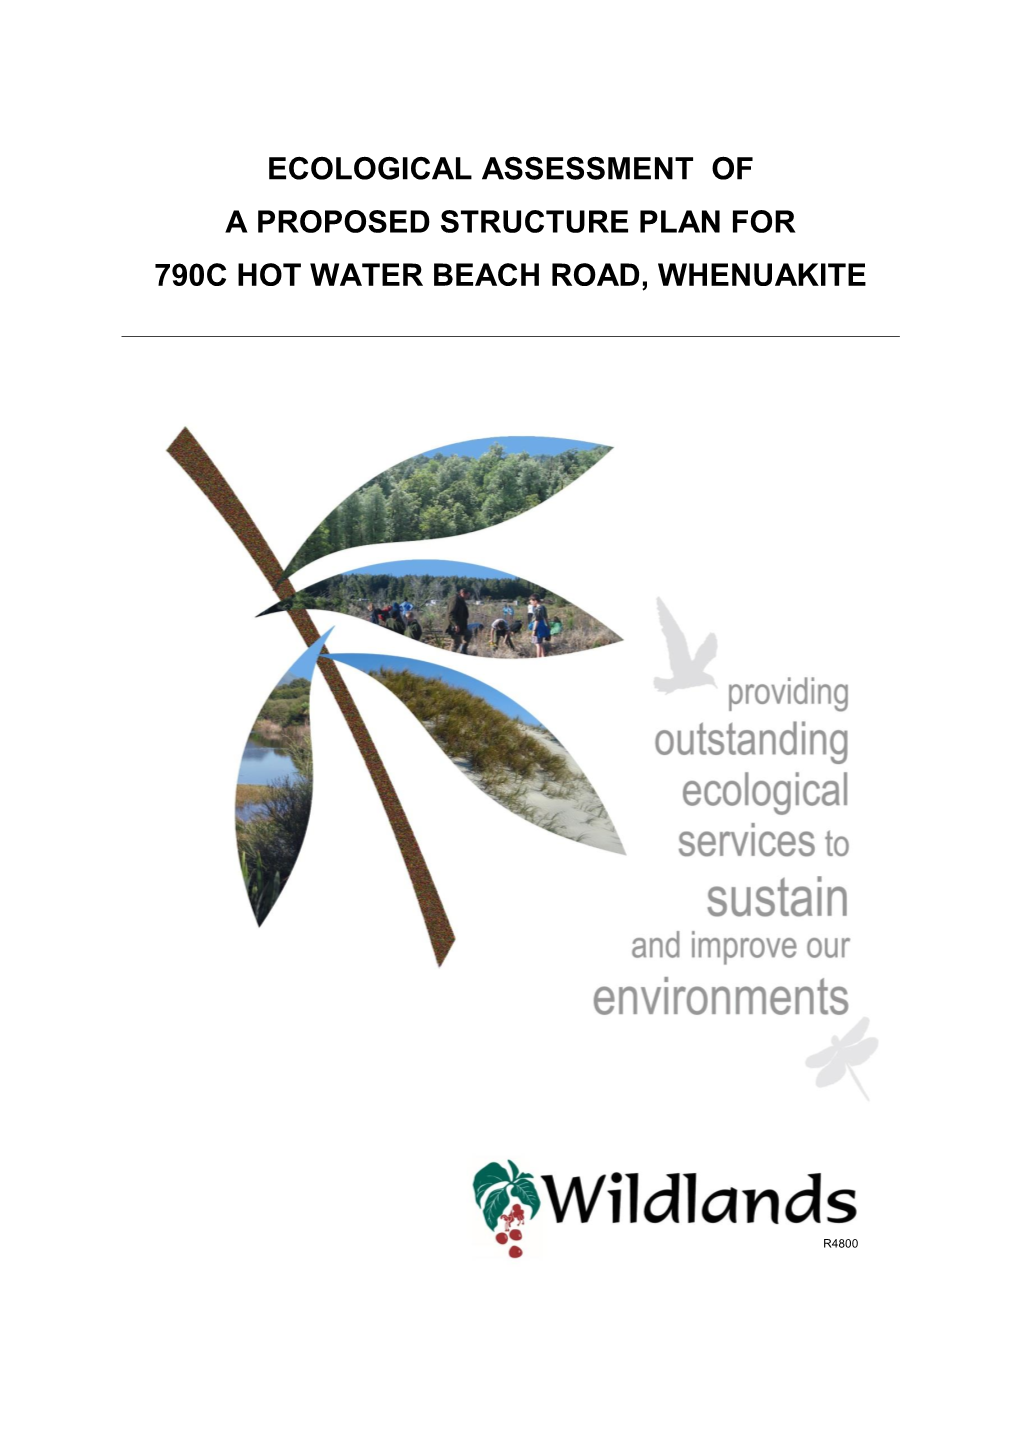 Ecological Assessment of a Proposed Structure Plan for 790C Hot Water Beach Road, Whenuakite